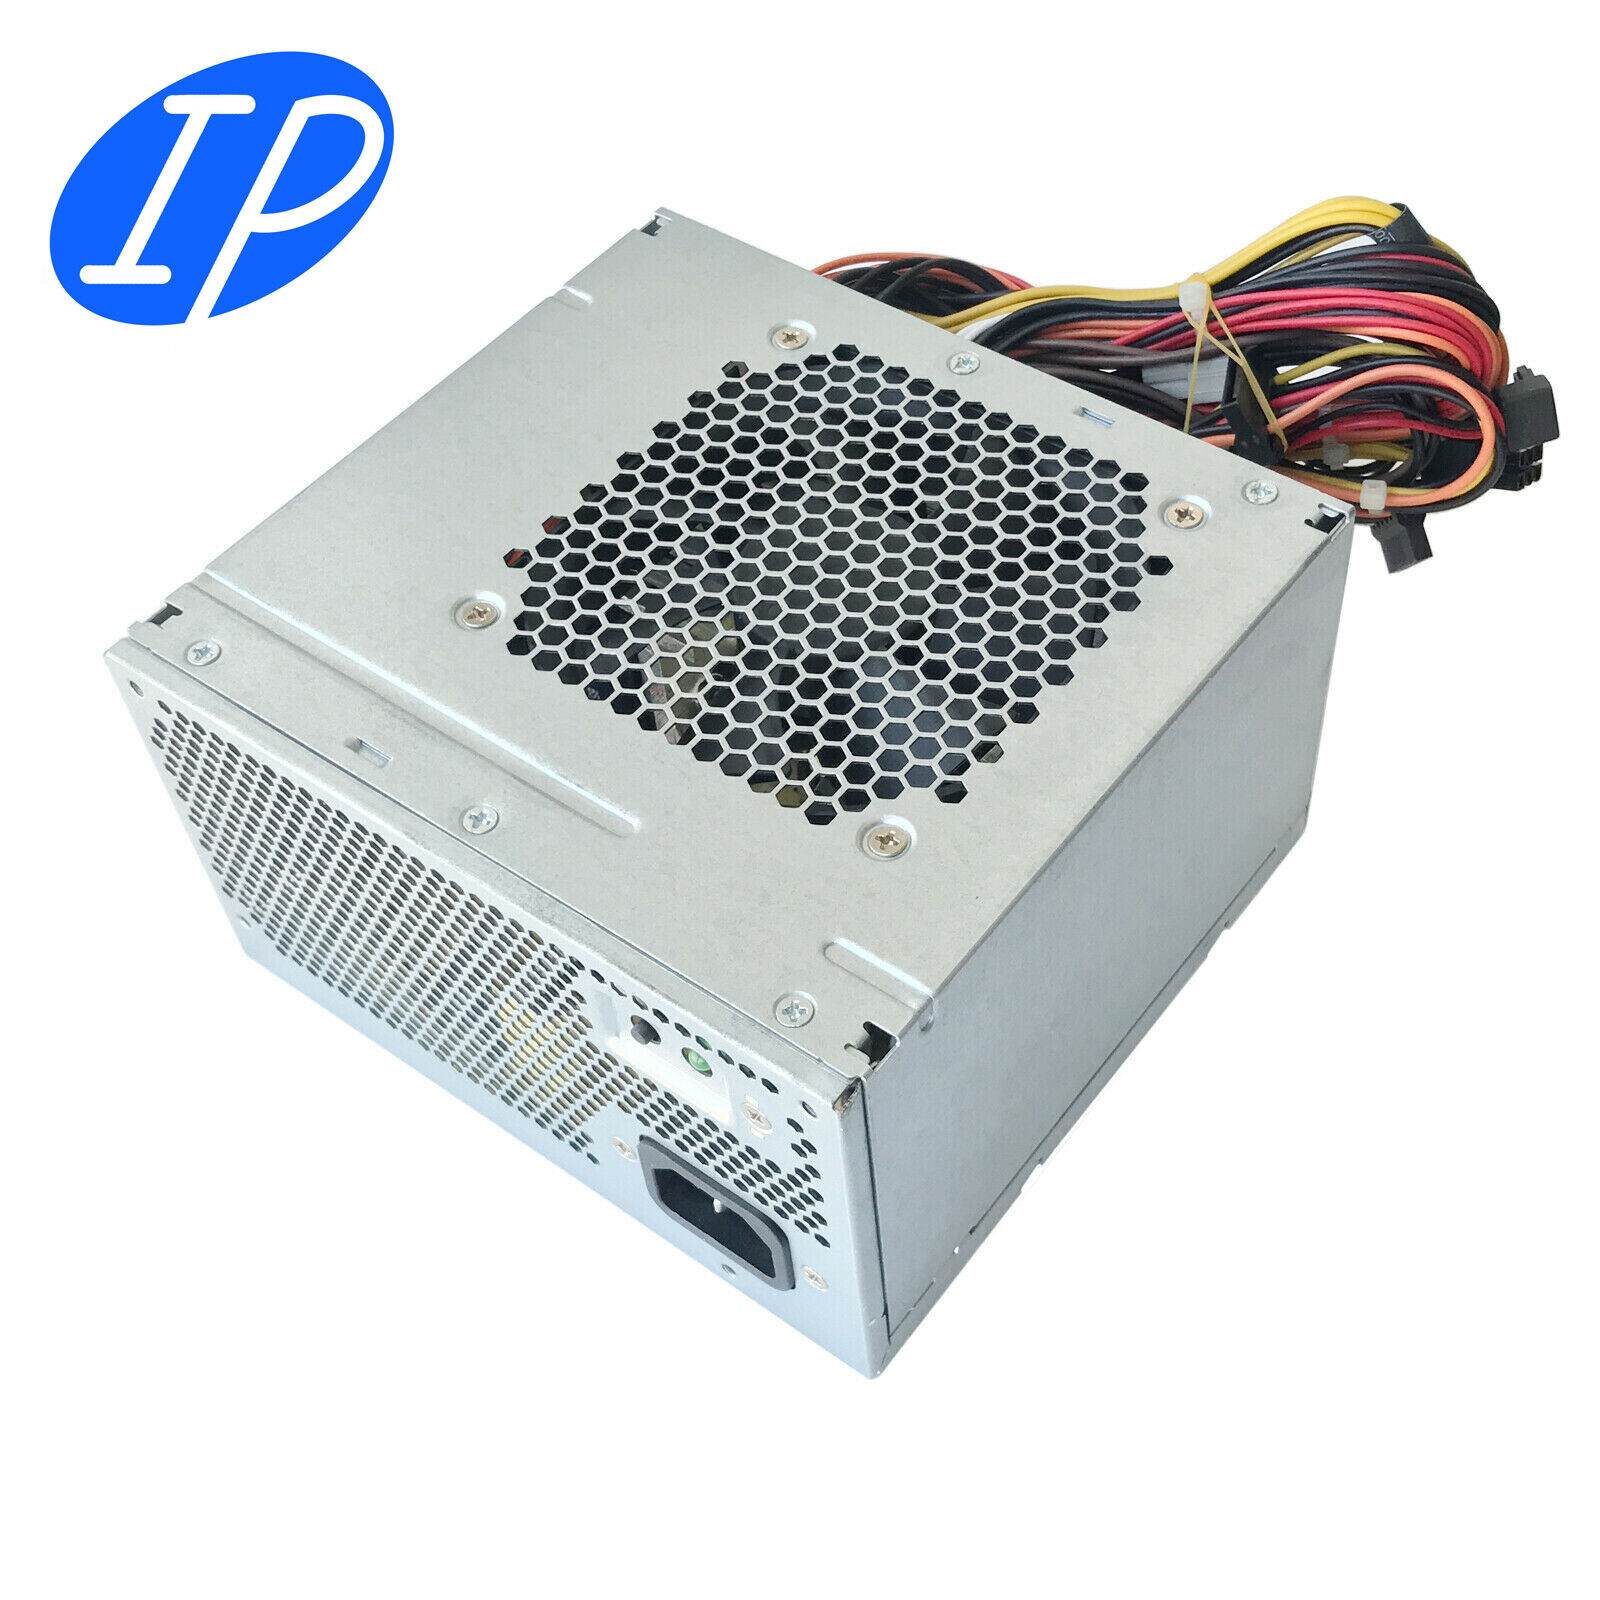 New 460W Power Supply For XPS 8910 8920 8300 8500 8900 R5 D460AM-03 DPS-460DB-15